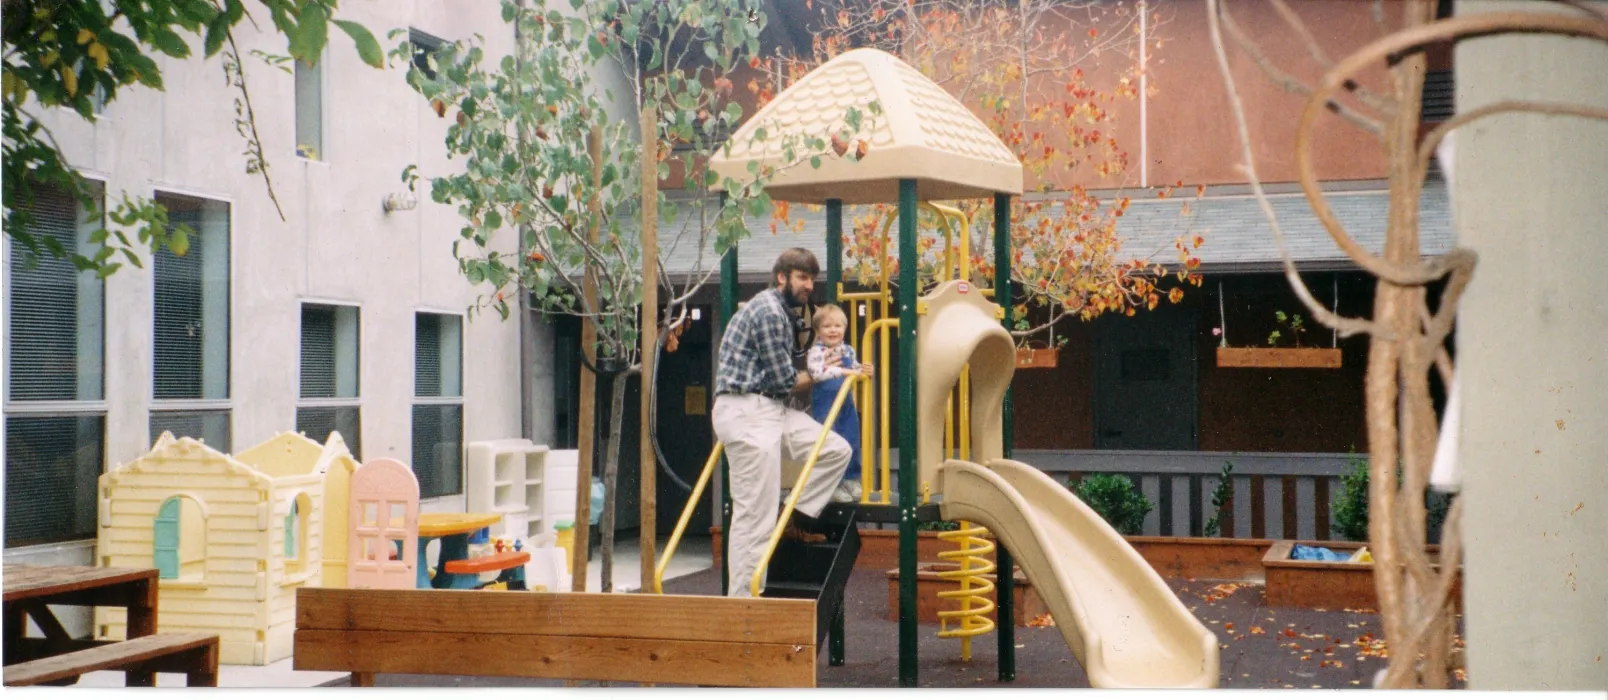 Man and child playing on the play structure at Sunrise Village in Fremont, California.